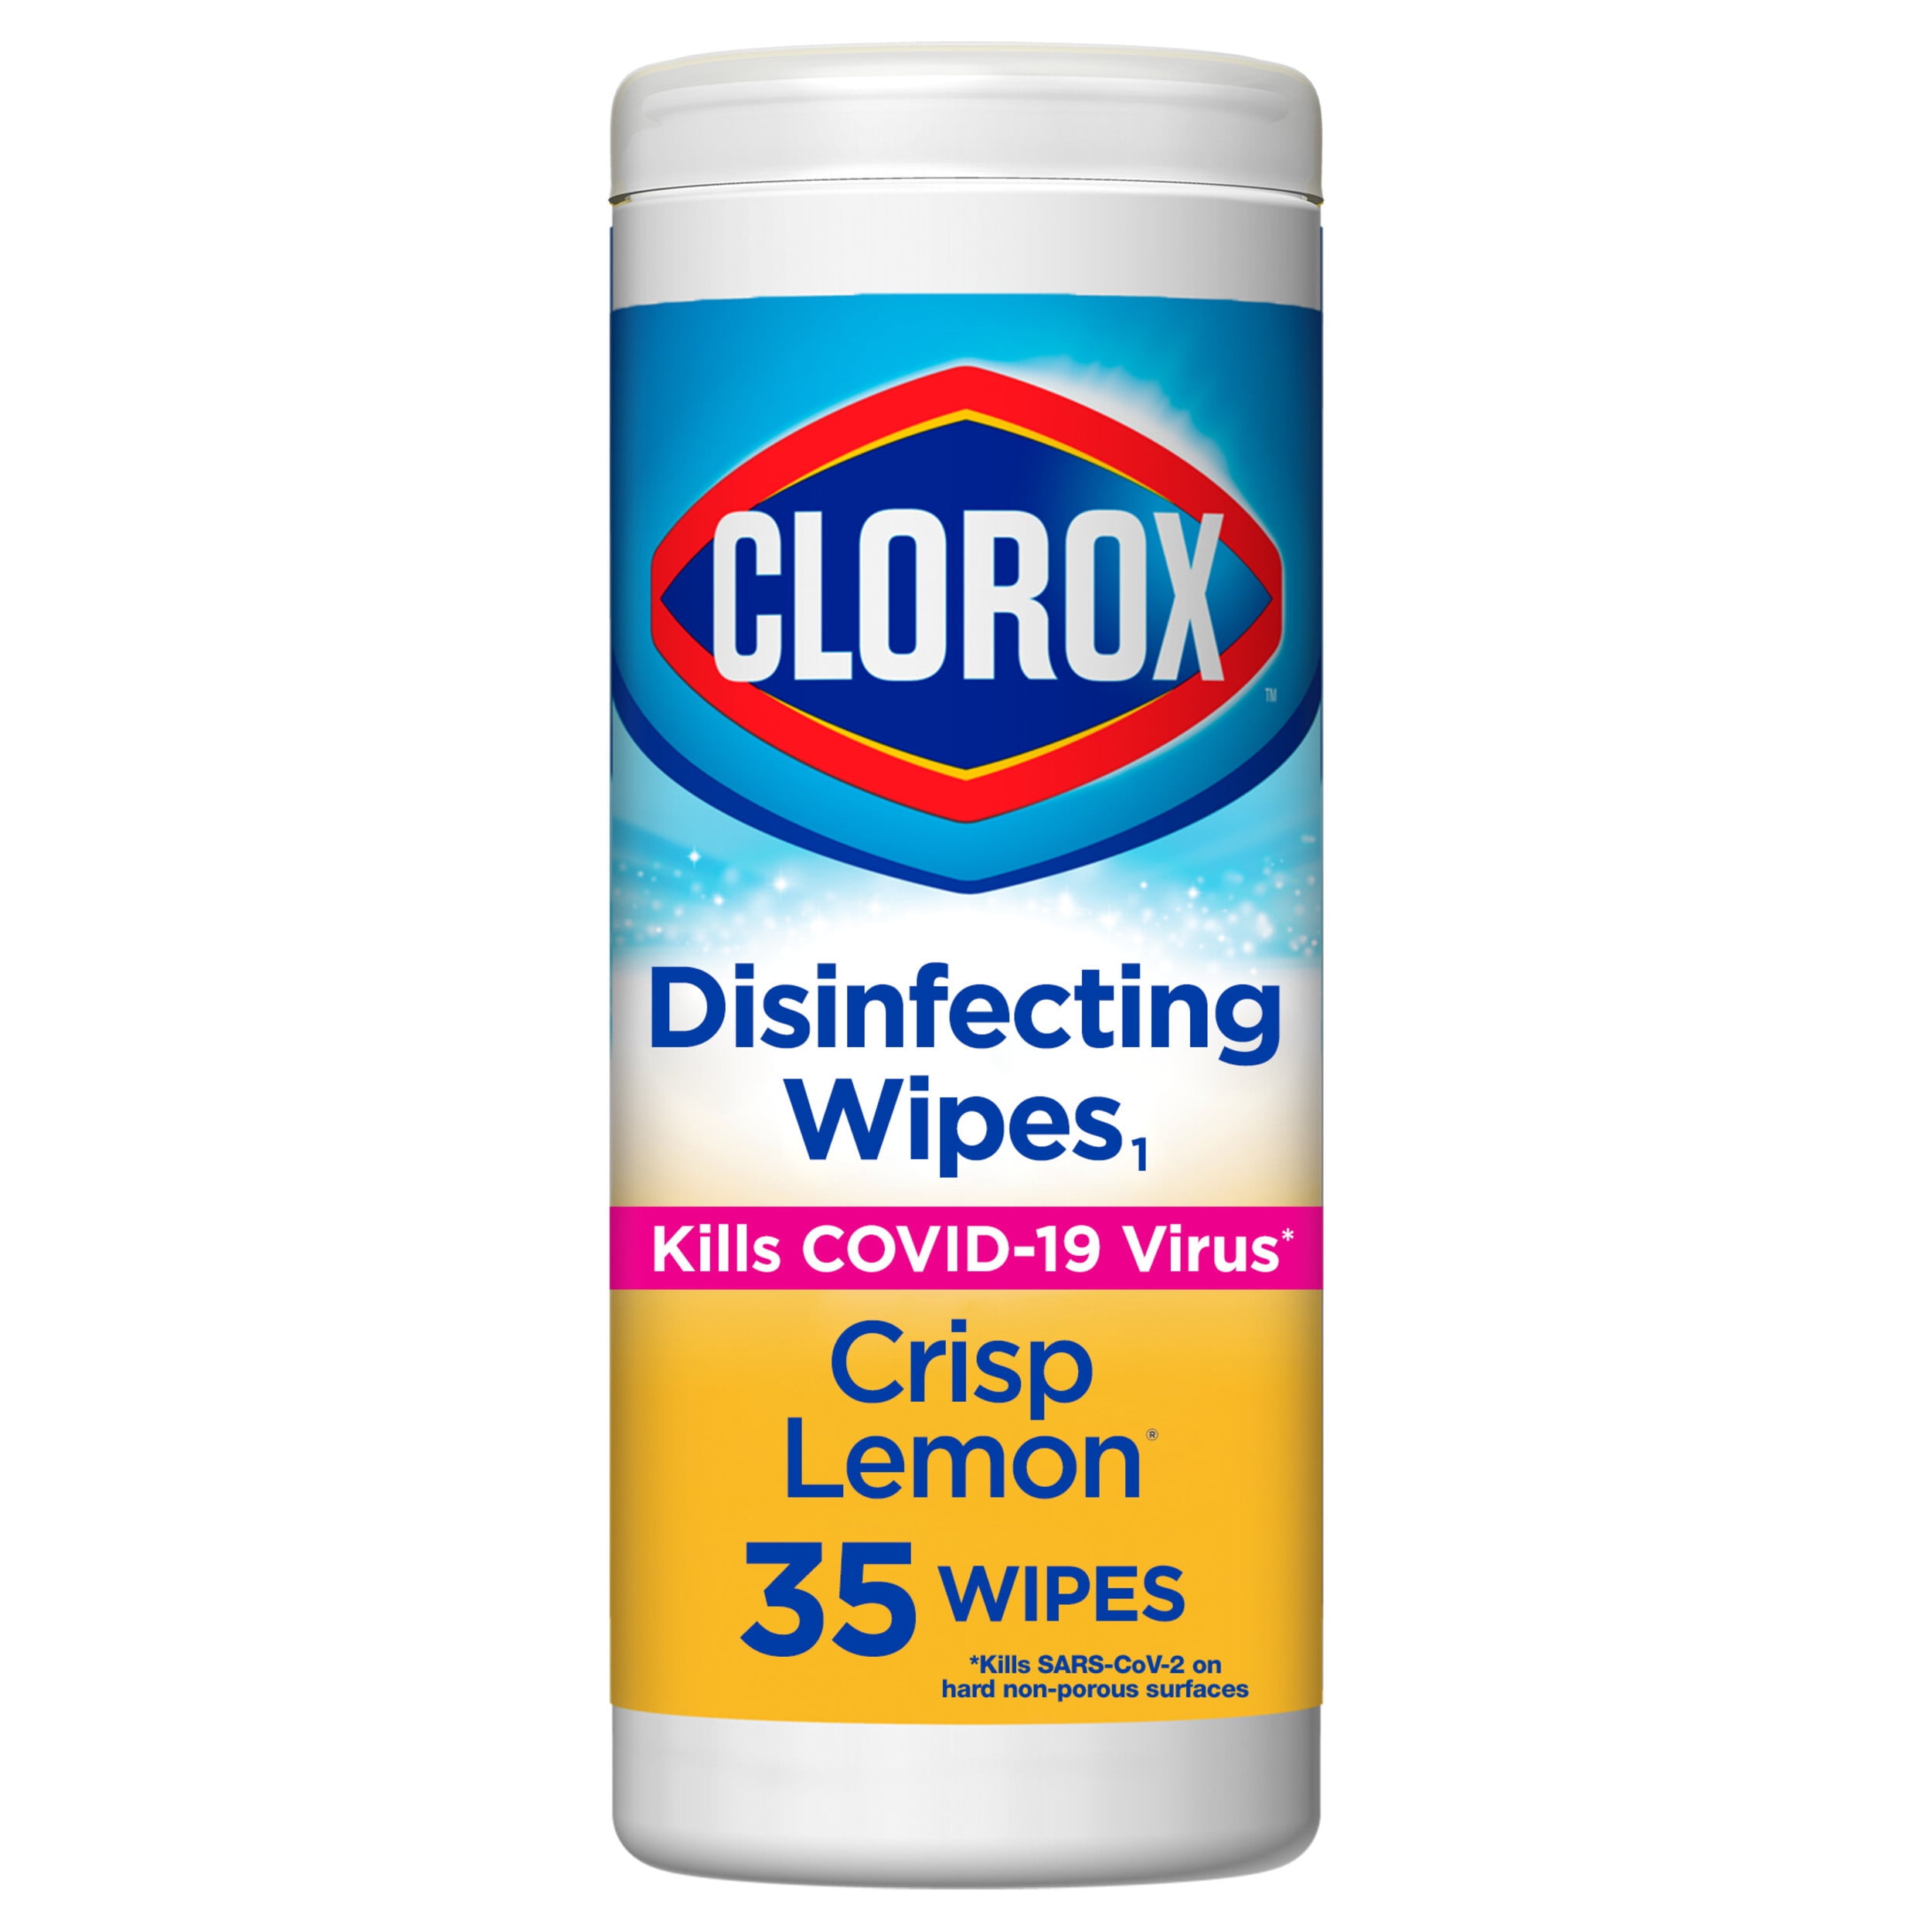 Clorox Bleach-Free Disinfecting and Cleaning Wipes, Crisp Lemon, 35 Count